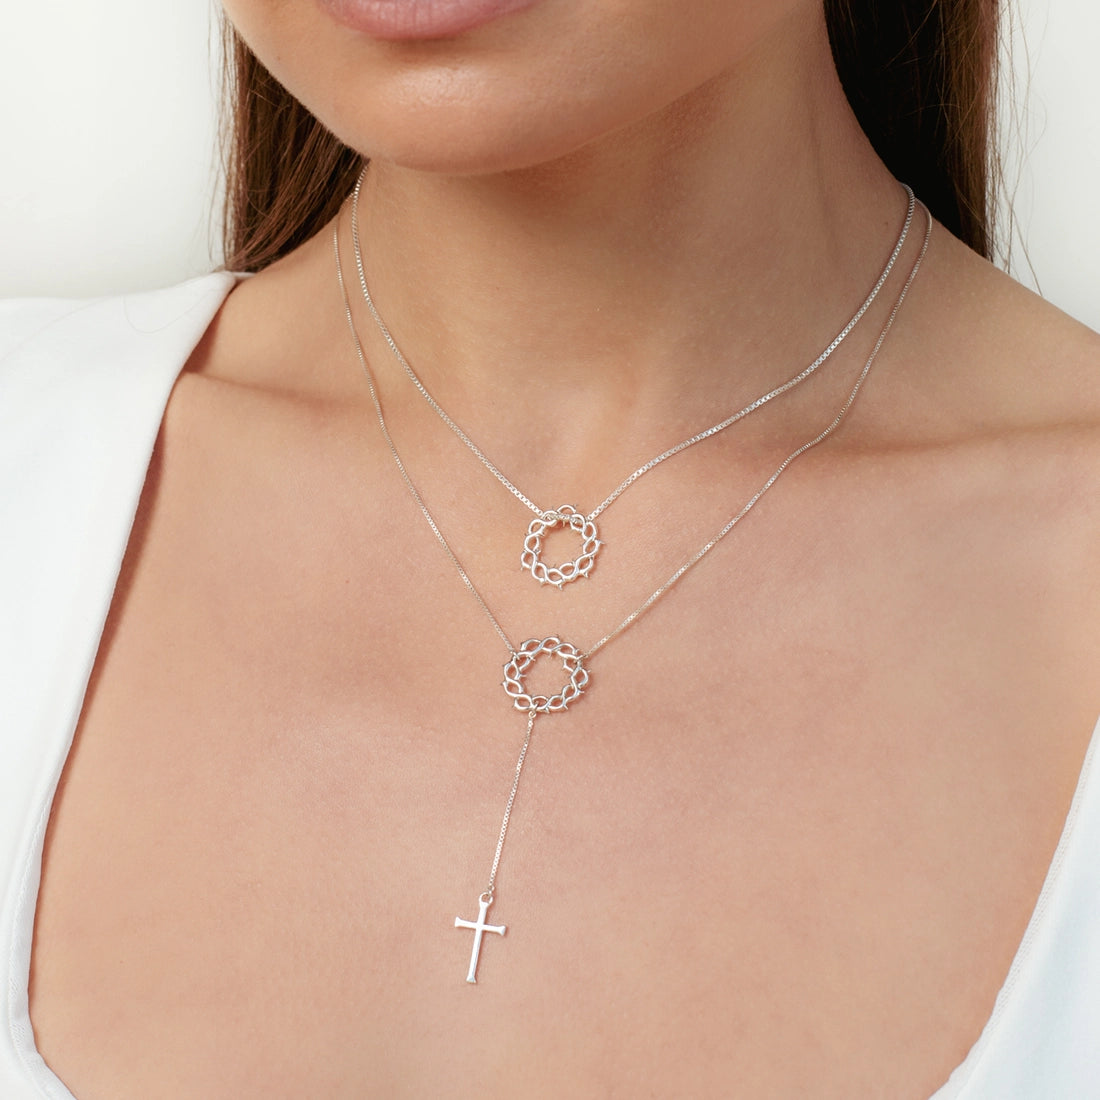 Christian woman wearing 2 silver crown of thorns necklaces one with a cross pendant from the insignia collection by Rizen Jewelry